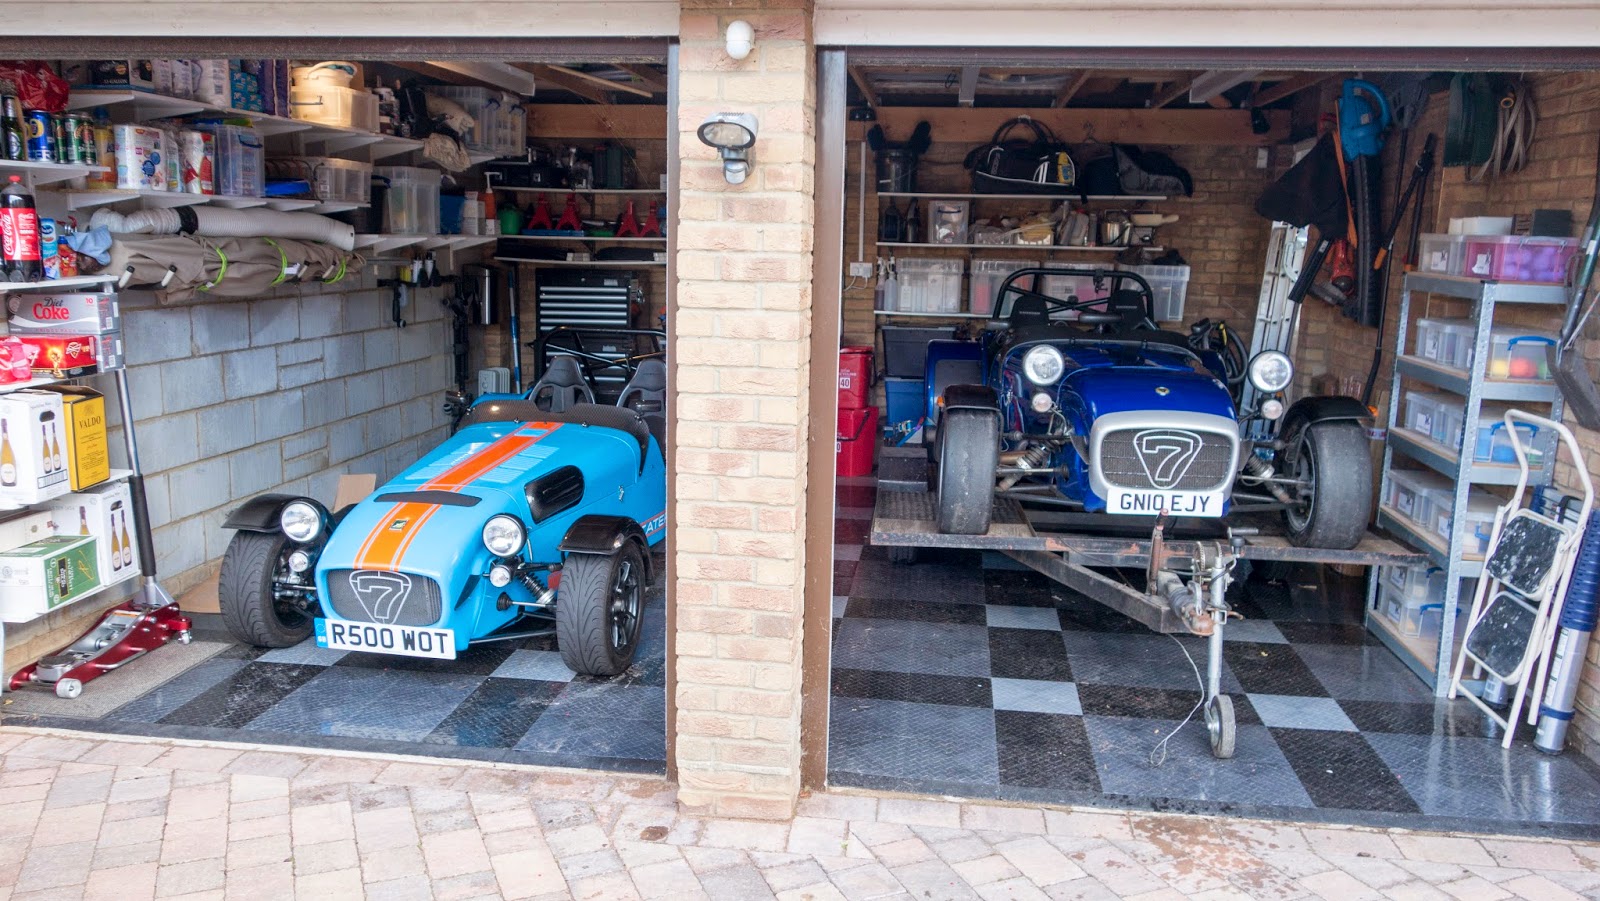 Caterham R500 and R300 Duratec's parked in my garage.